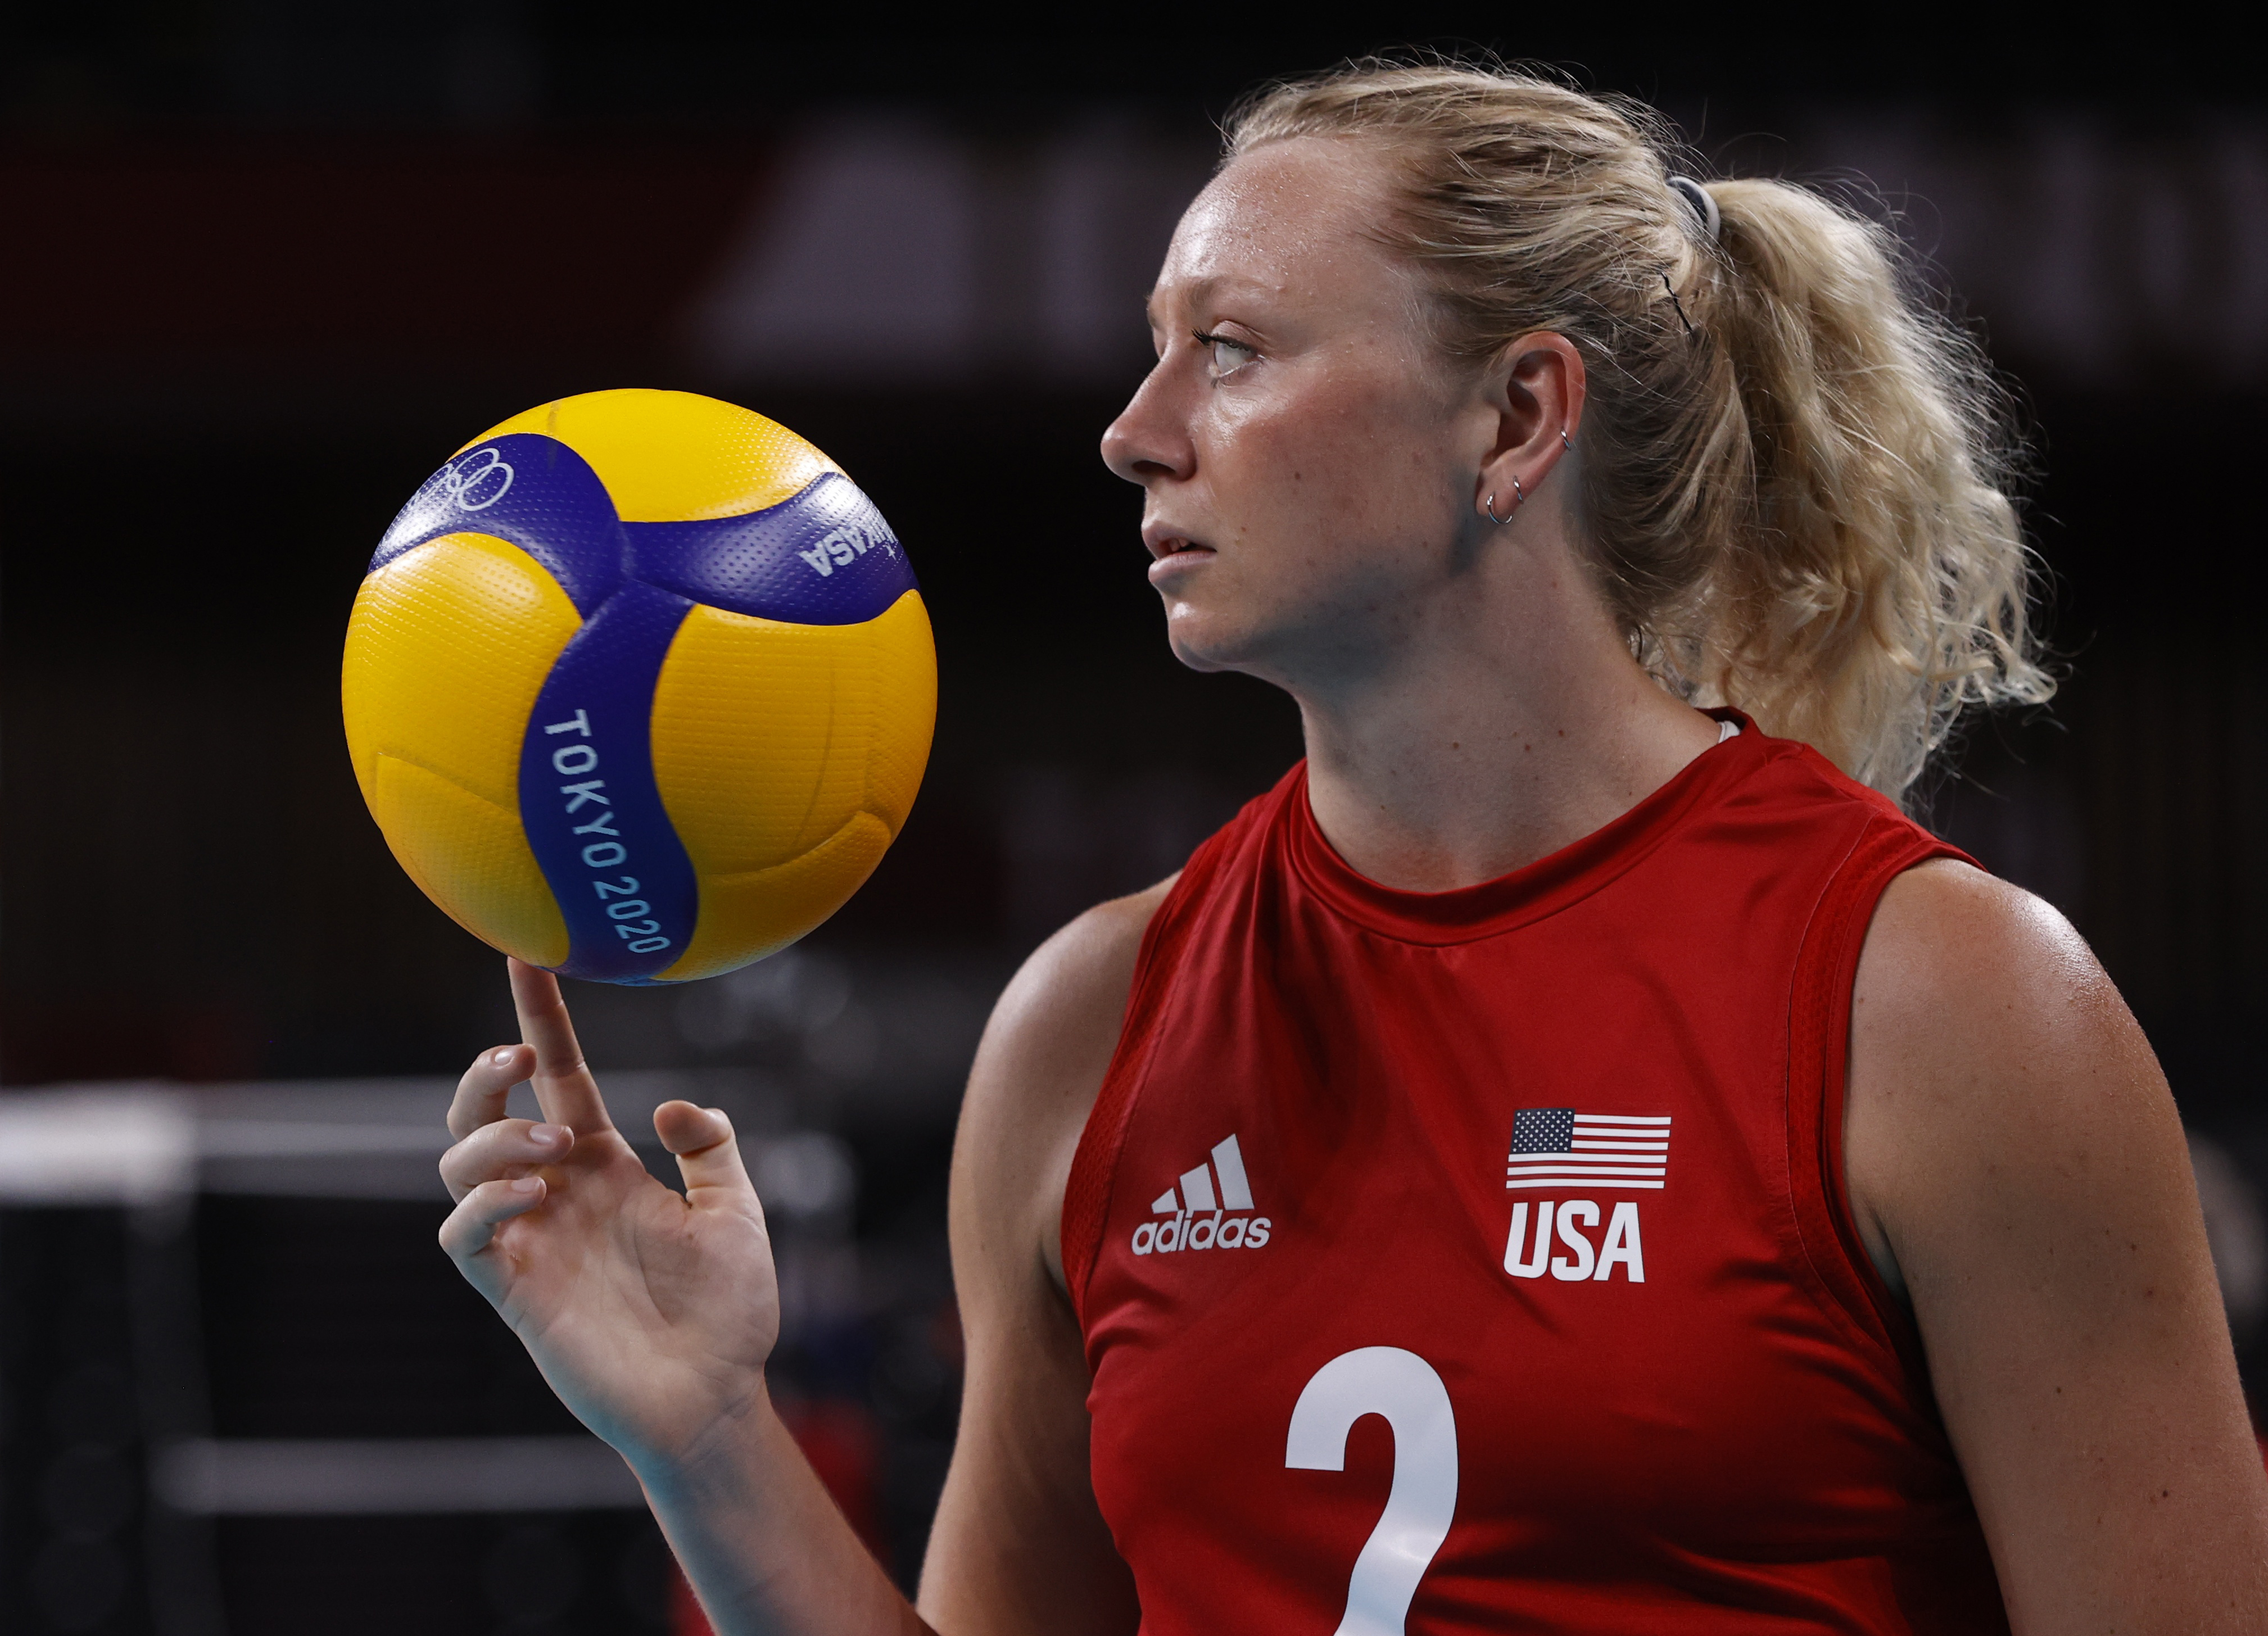 Tokyo 2020 Olympics - Volleyball - Women's Pool B - United States v Italy - Ariake Arena, Tokyo, Japan – August 2, 2021. Jordyn Poulter of the United States before the match. REUTERS/Valentyn Ogirenko